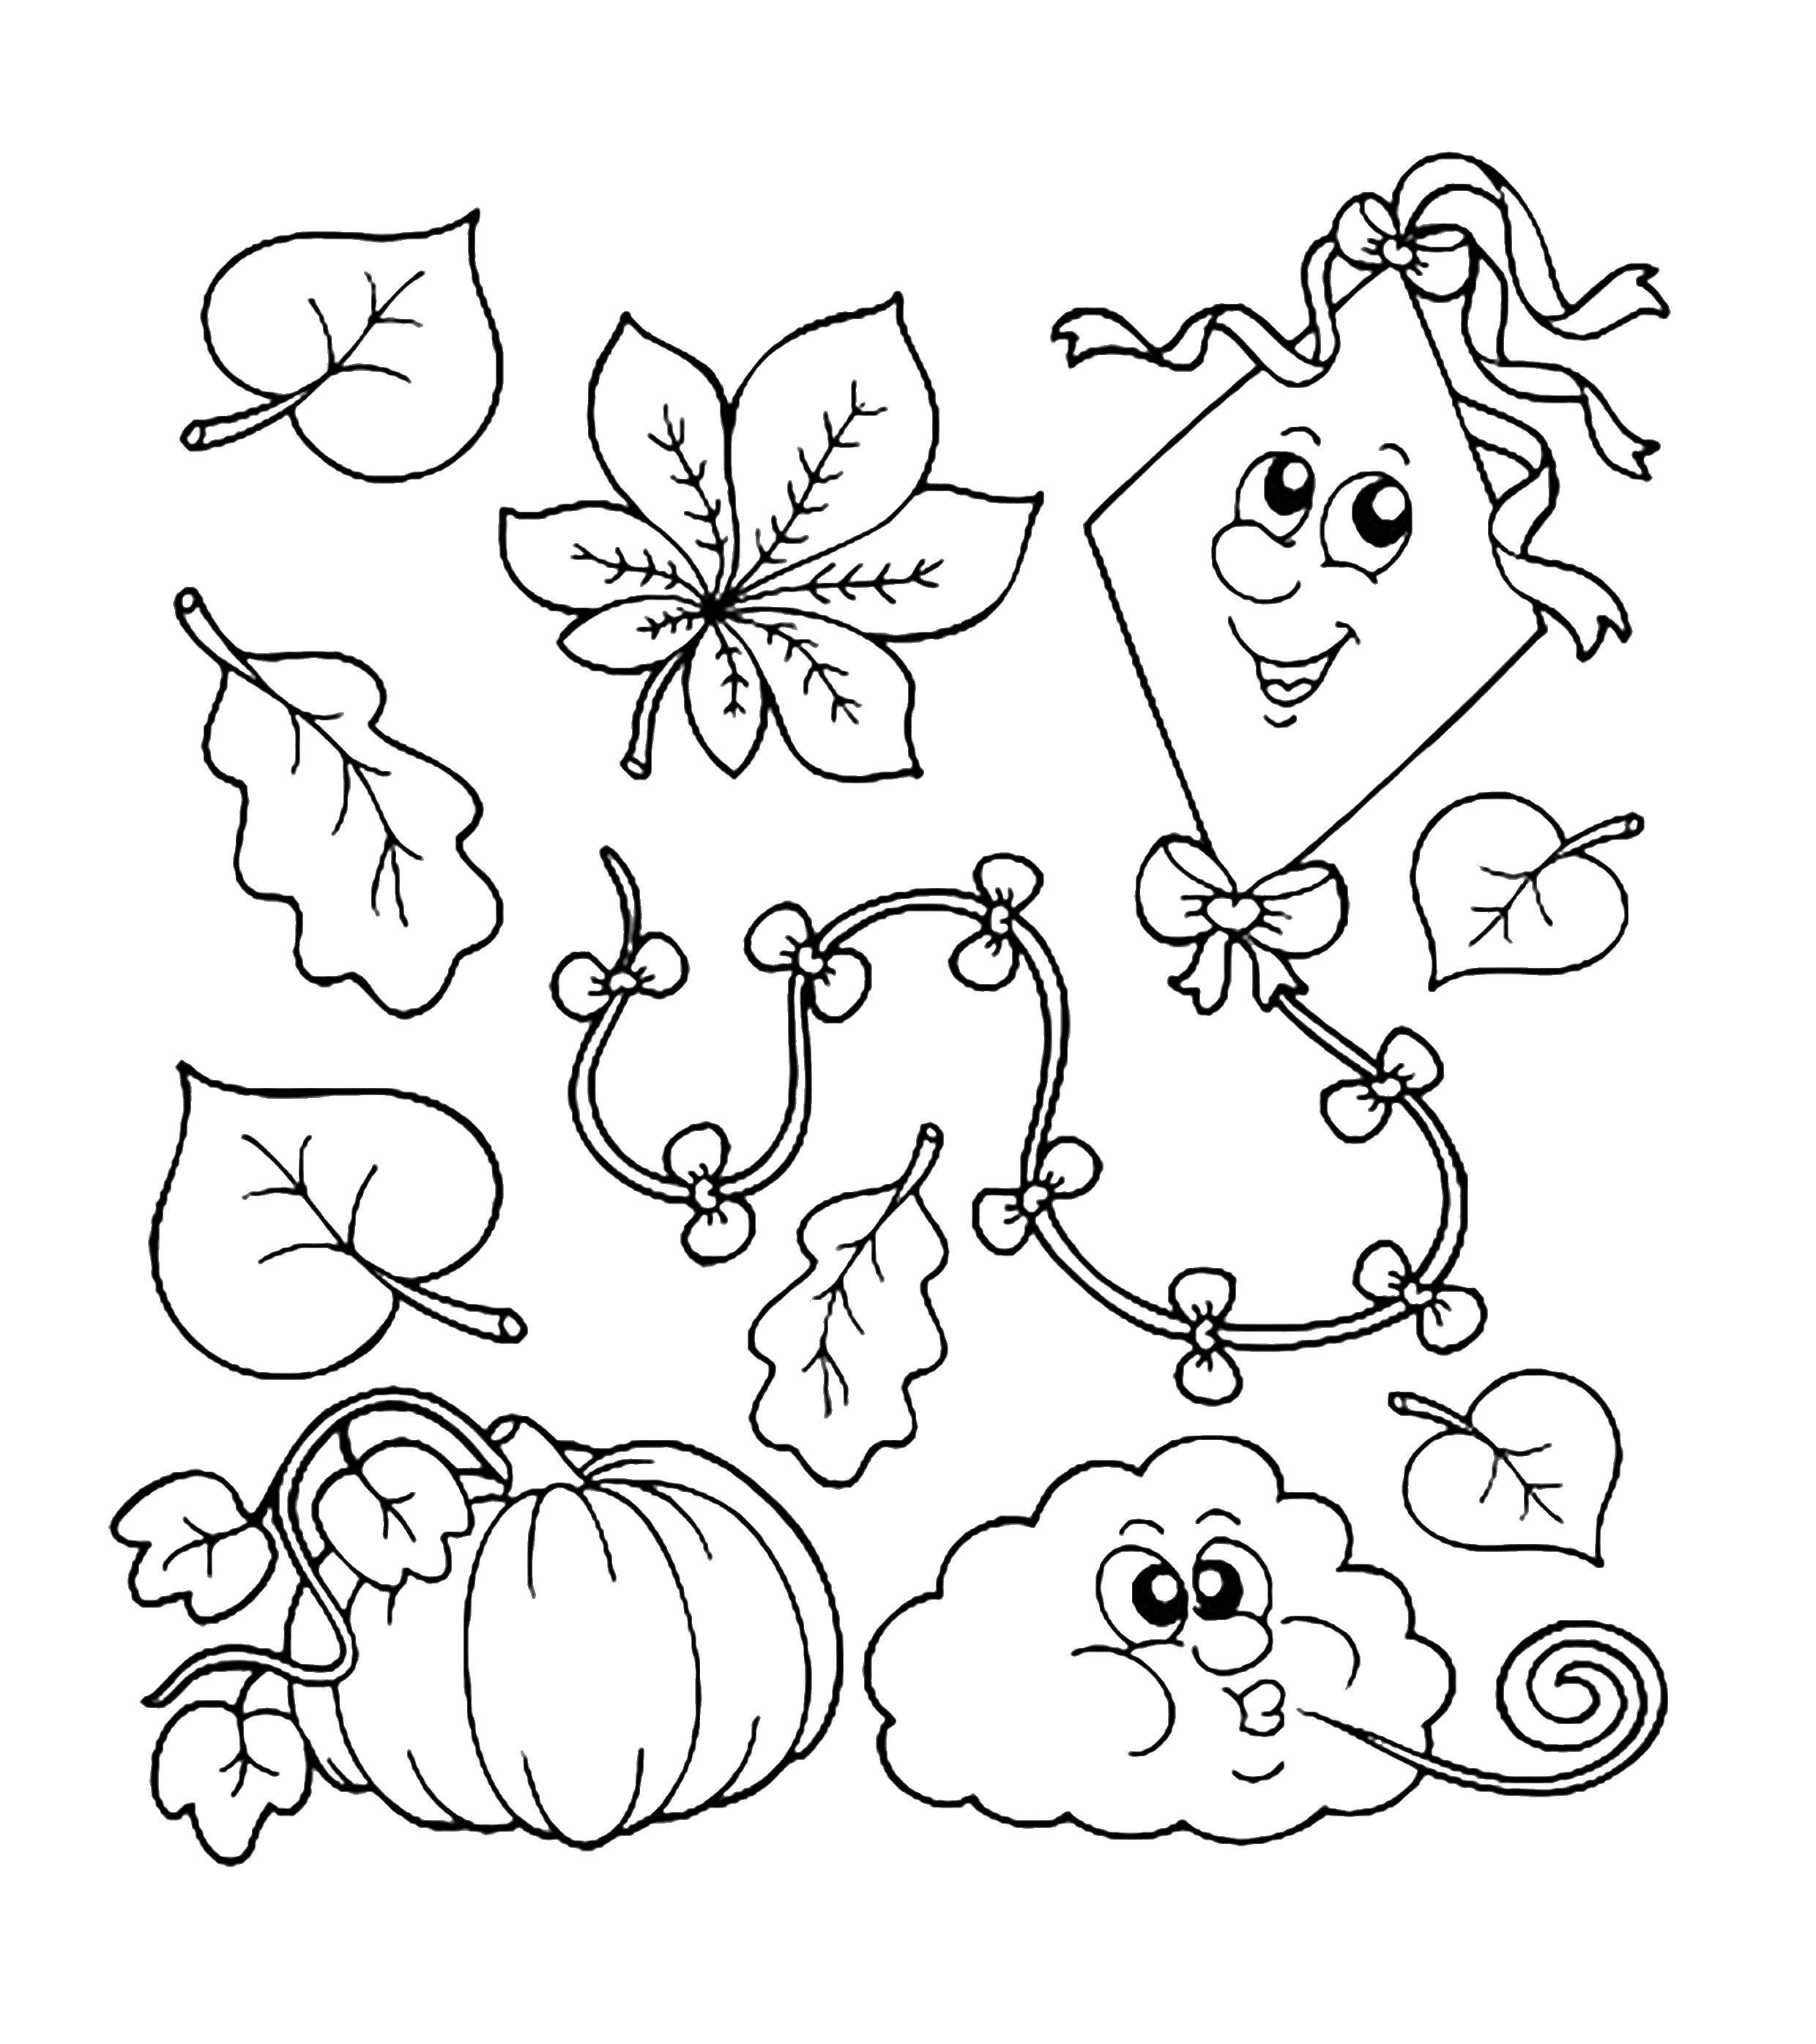 Coloring Pumpkin and kite flying among the leaves. Category Coloring pages for kids. Tags:  Leaves, pumpkin, kite, balloon, or.